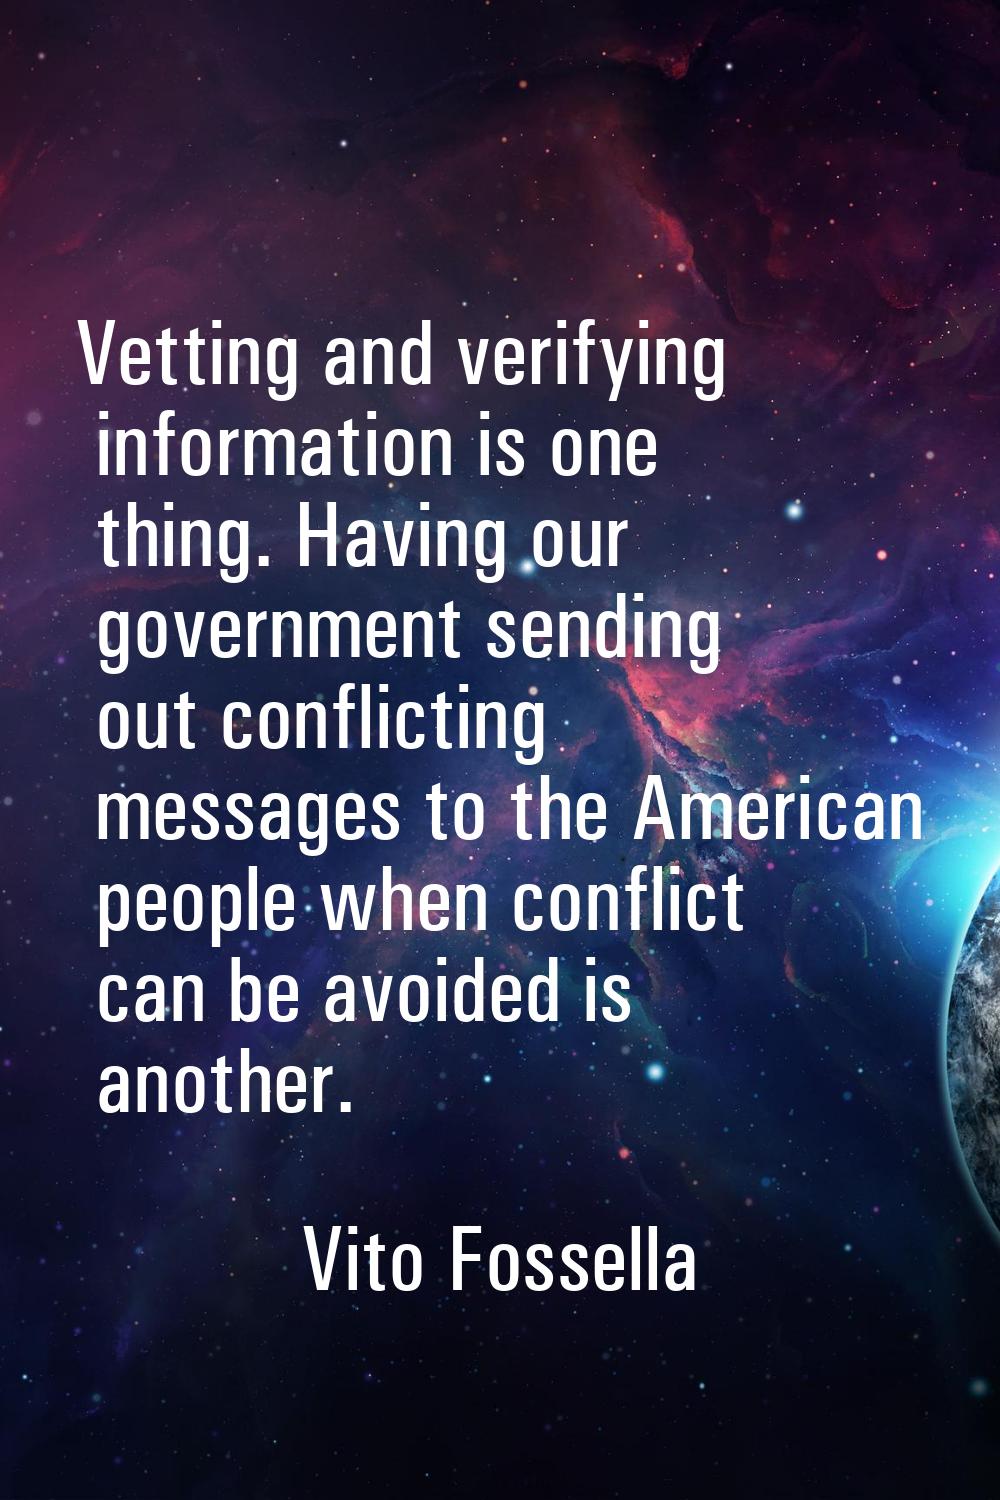 Vetting and verifying information is one thing. Having our government sending out conflicting messa